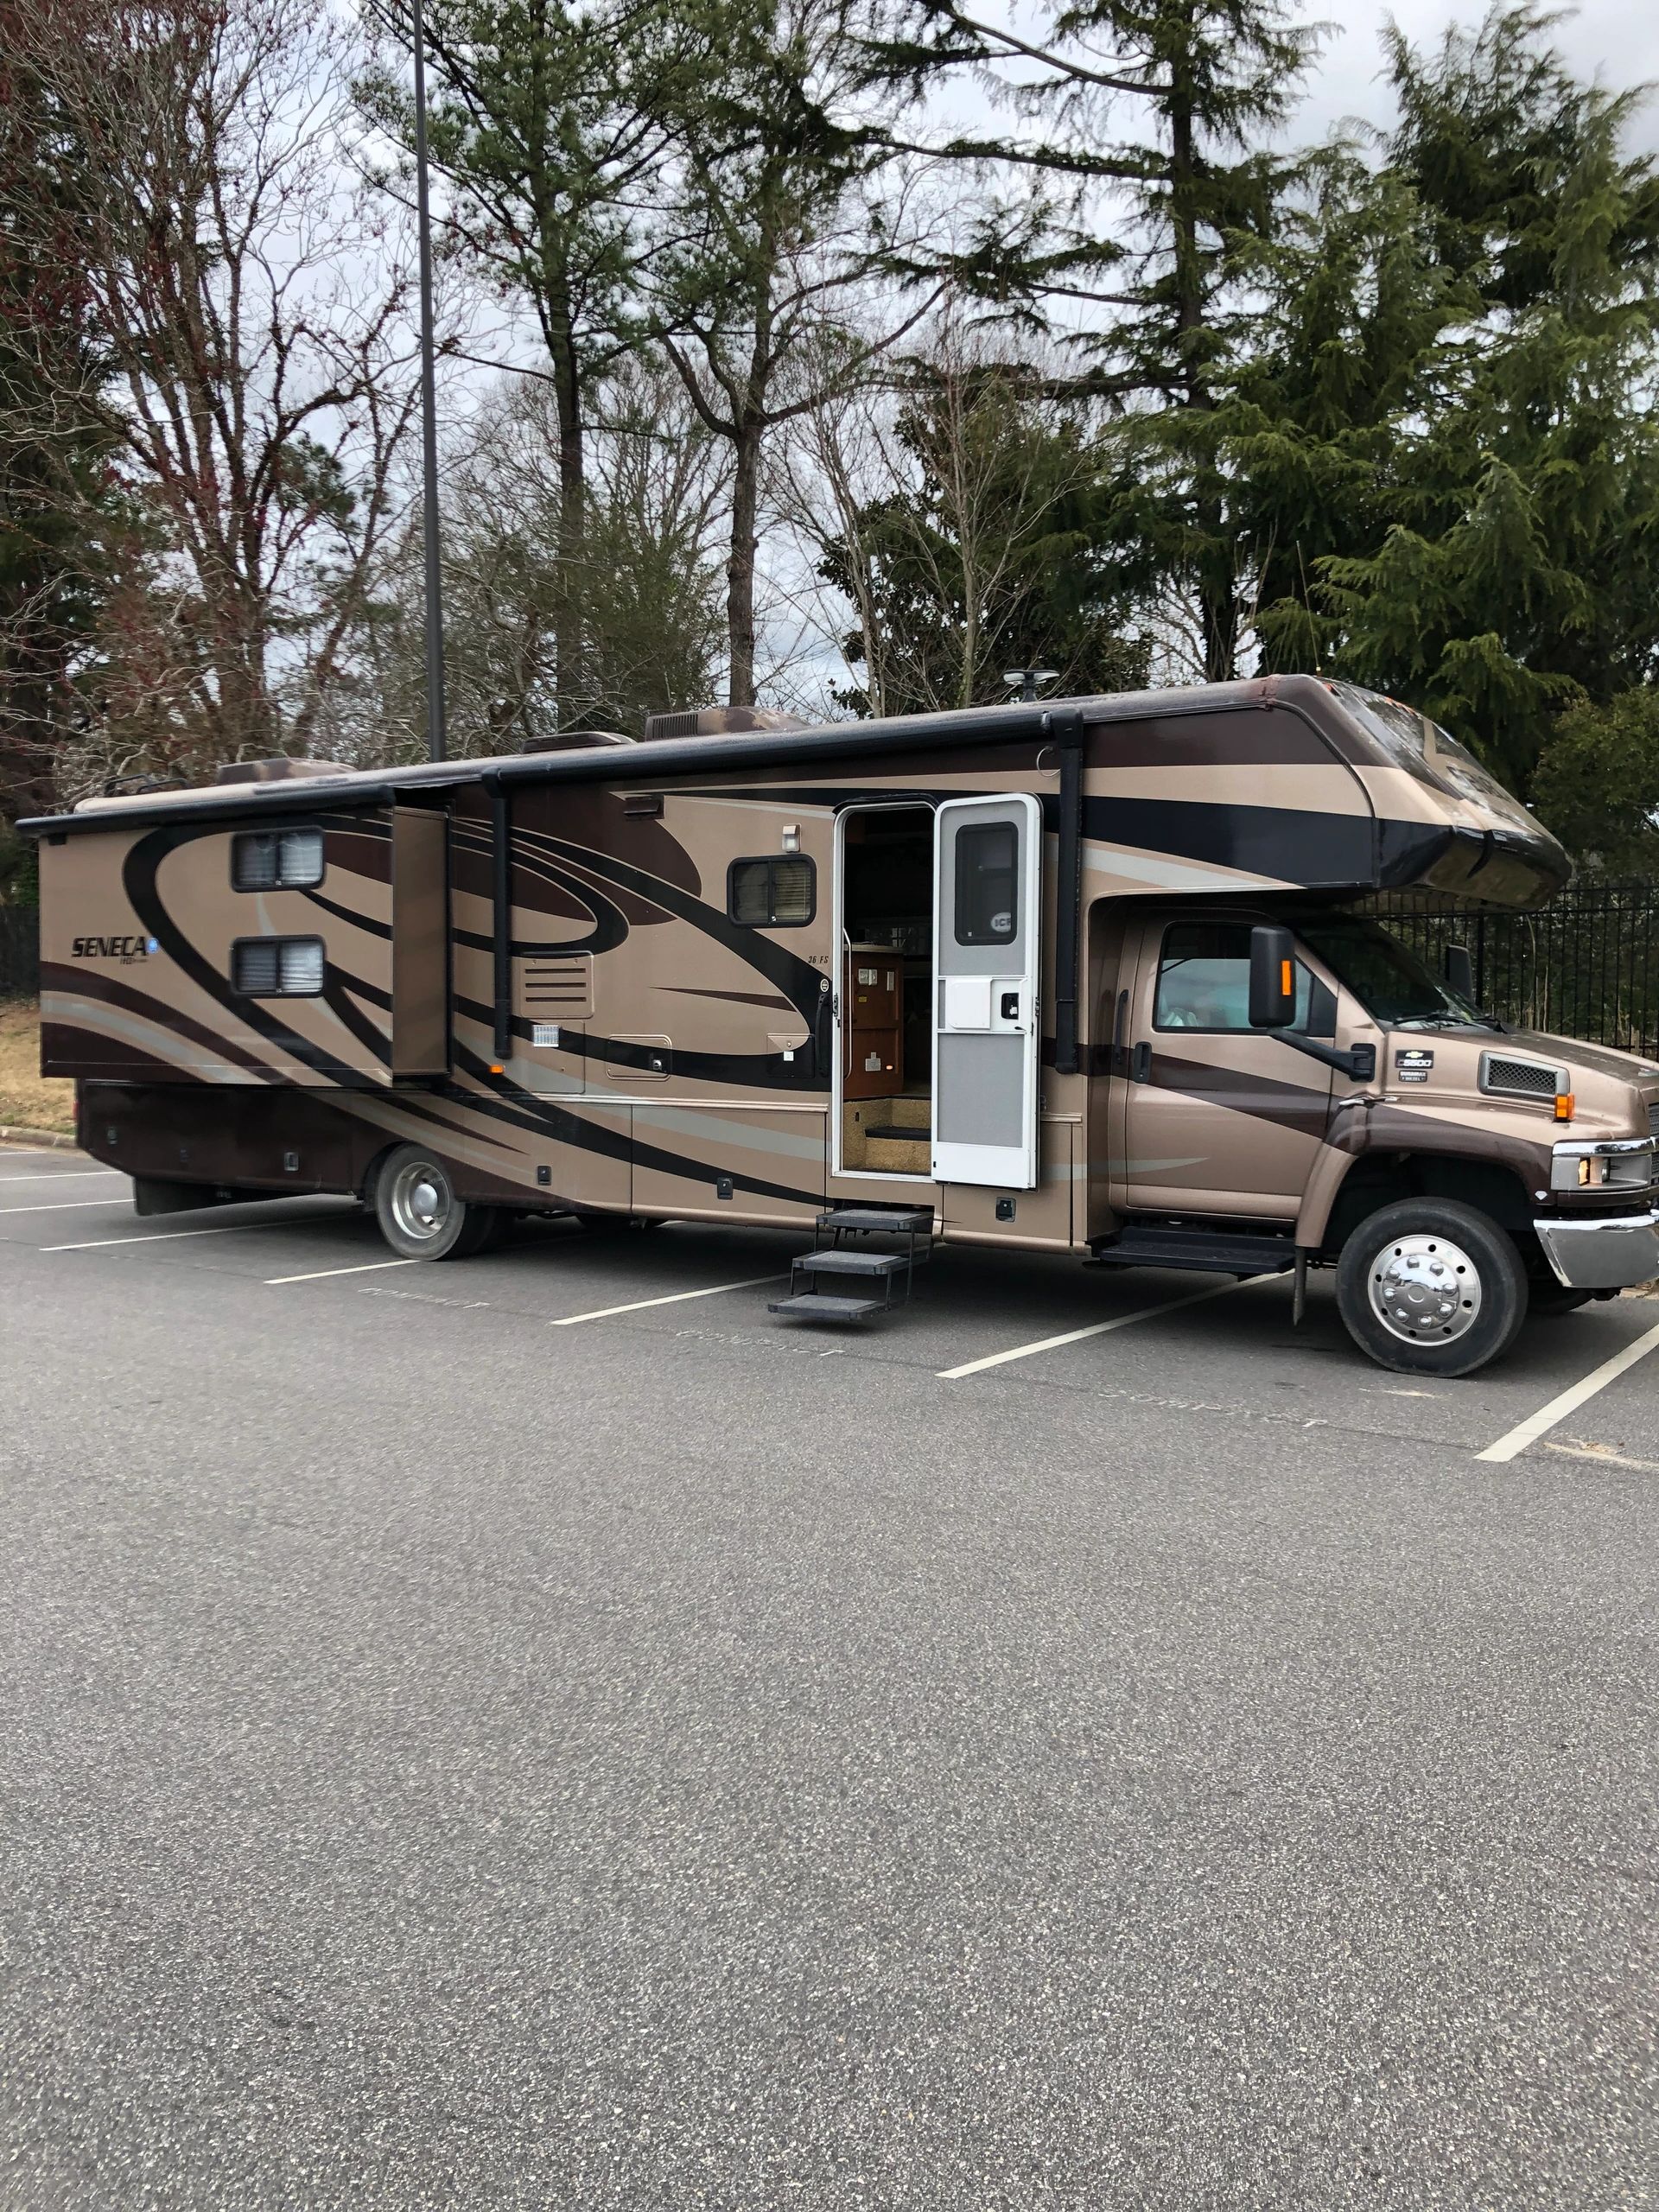 Eagle RV Inspections and Repair Services.